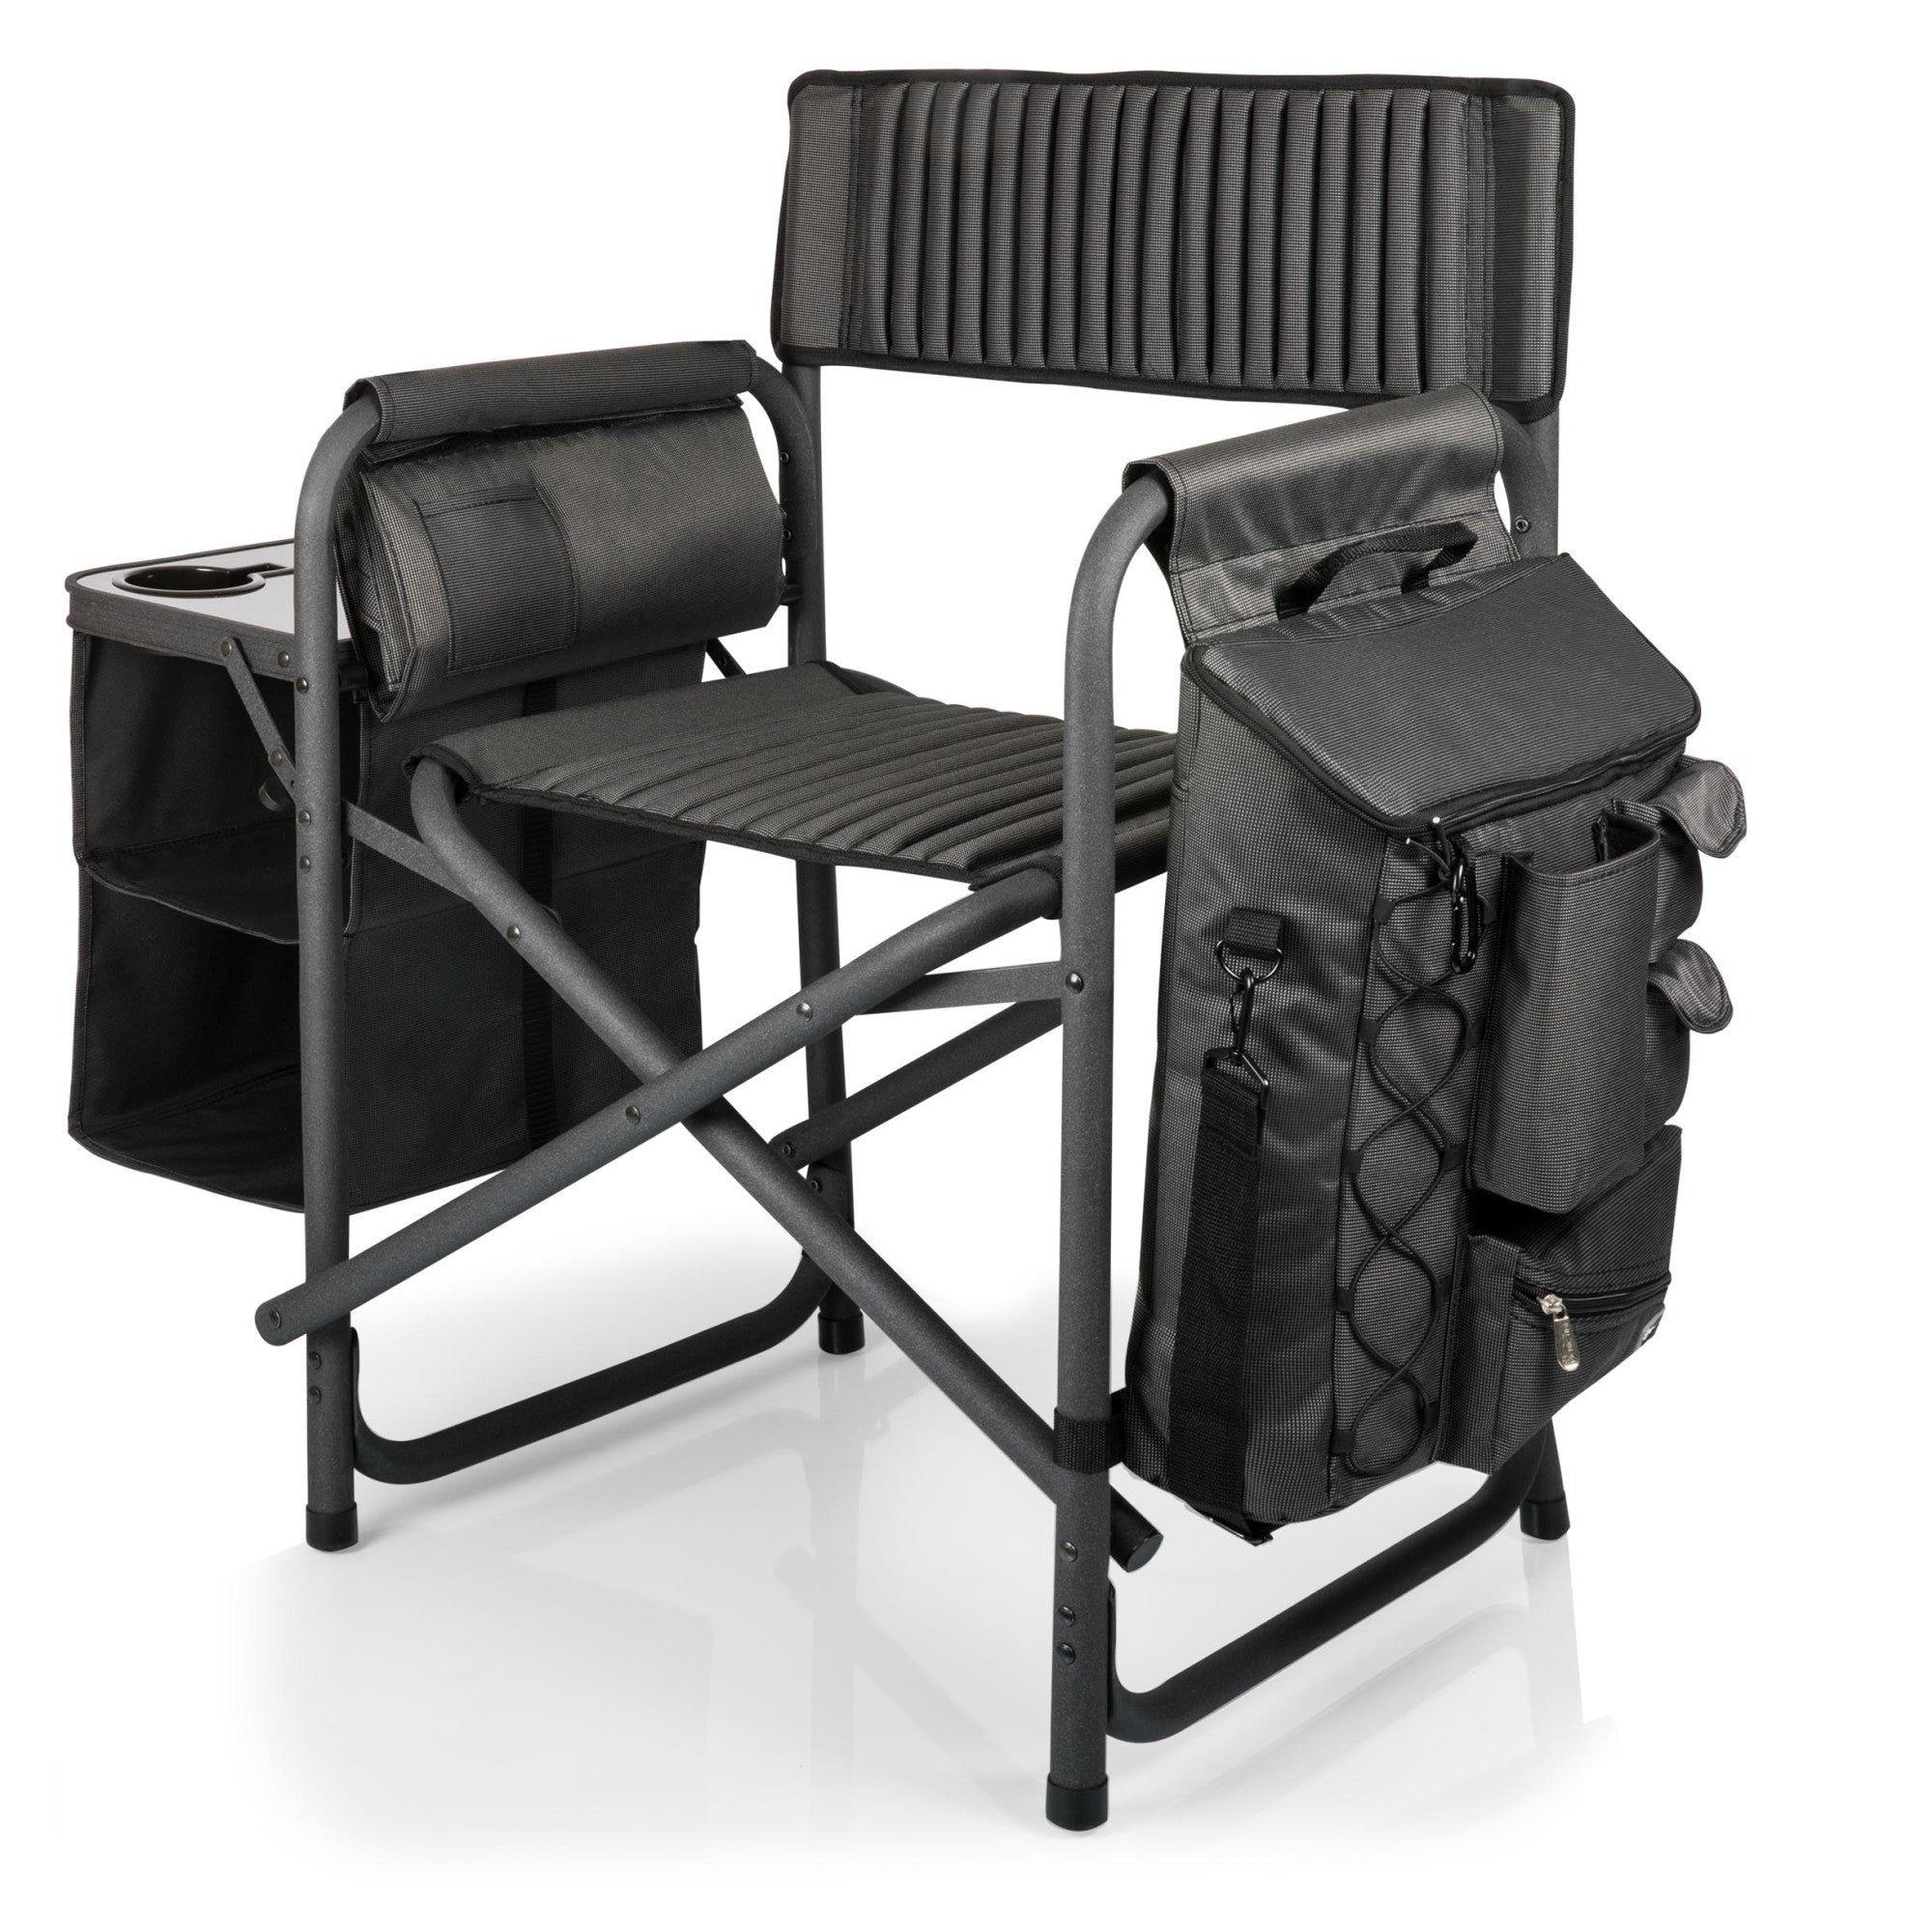 Louisville Cardinals - Fusion Camping Chair